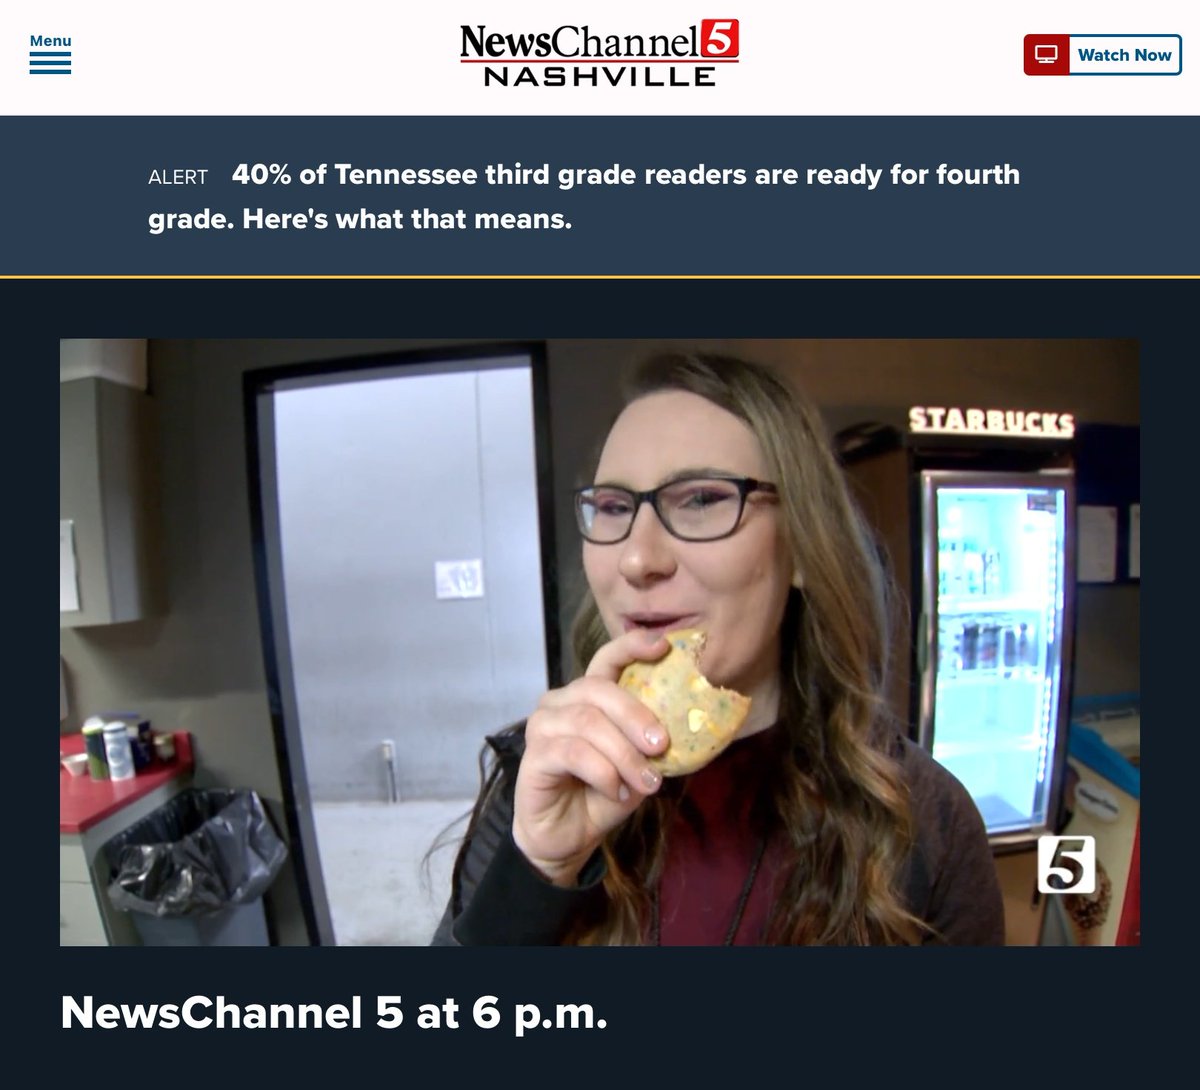 I've made it on the news AGAIN!!!! Nothing like people seeing you stuff your face with a cookie on air.😂